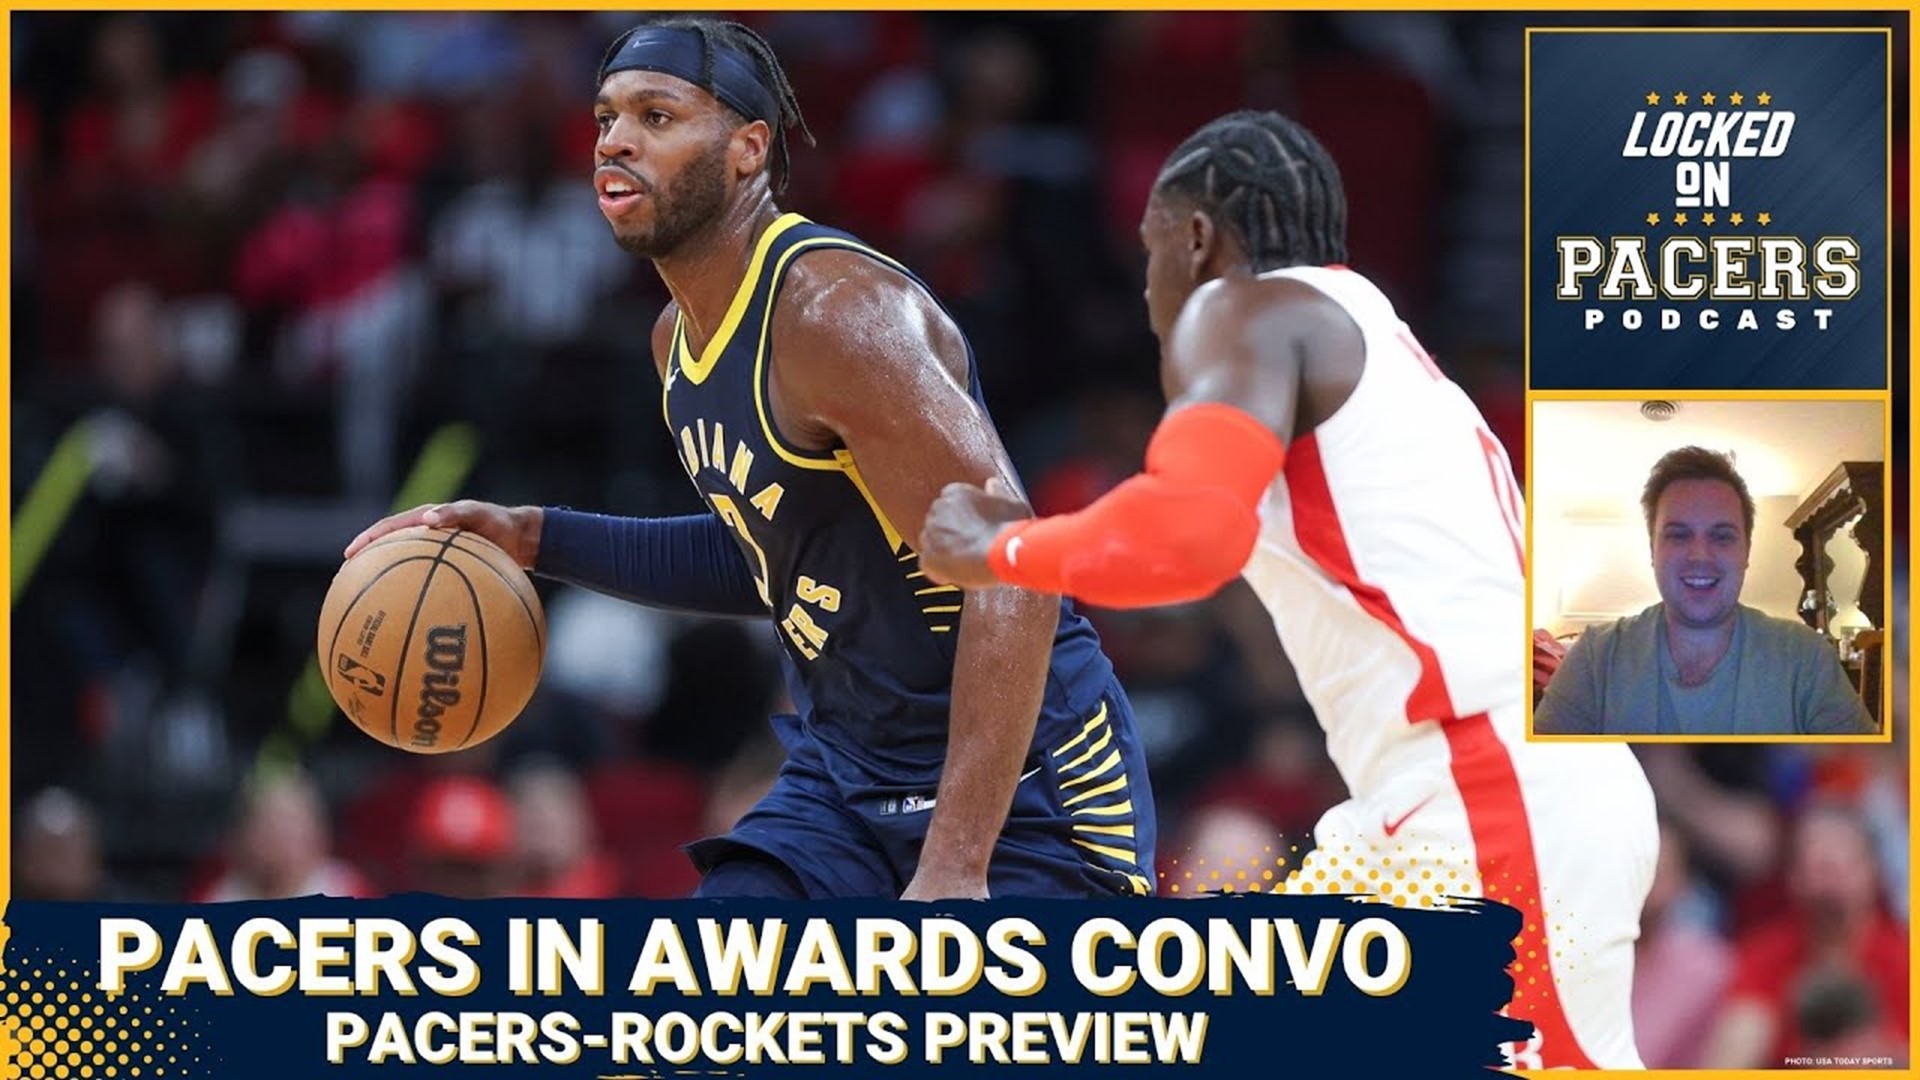 What awards are Indiana Pacers players & coaches in the mix for? Rockets preview. Mad Ants check in